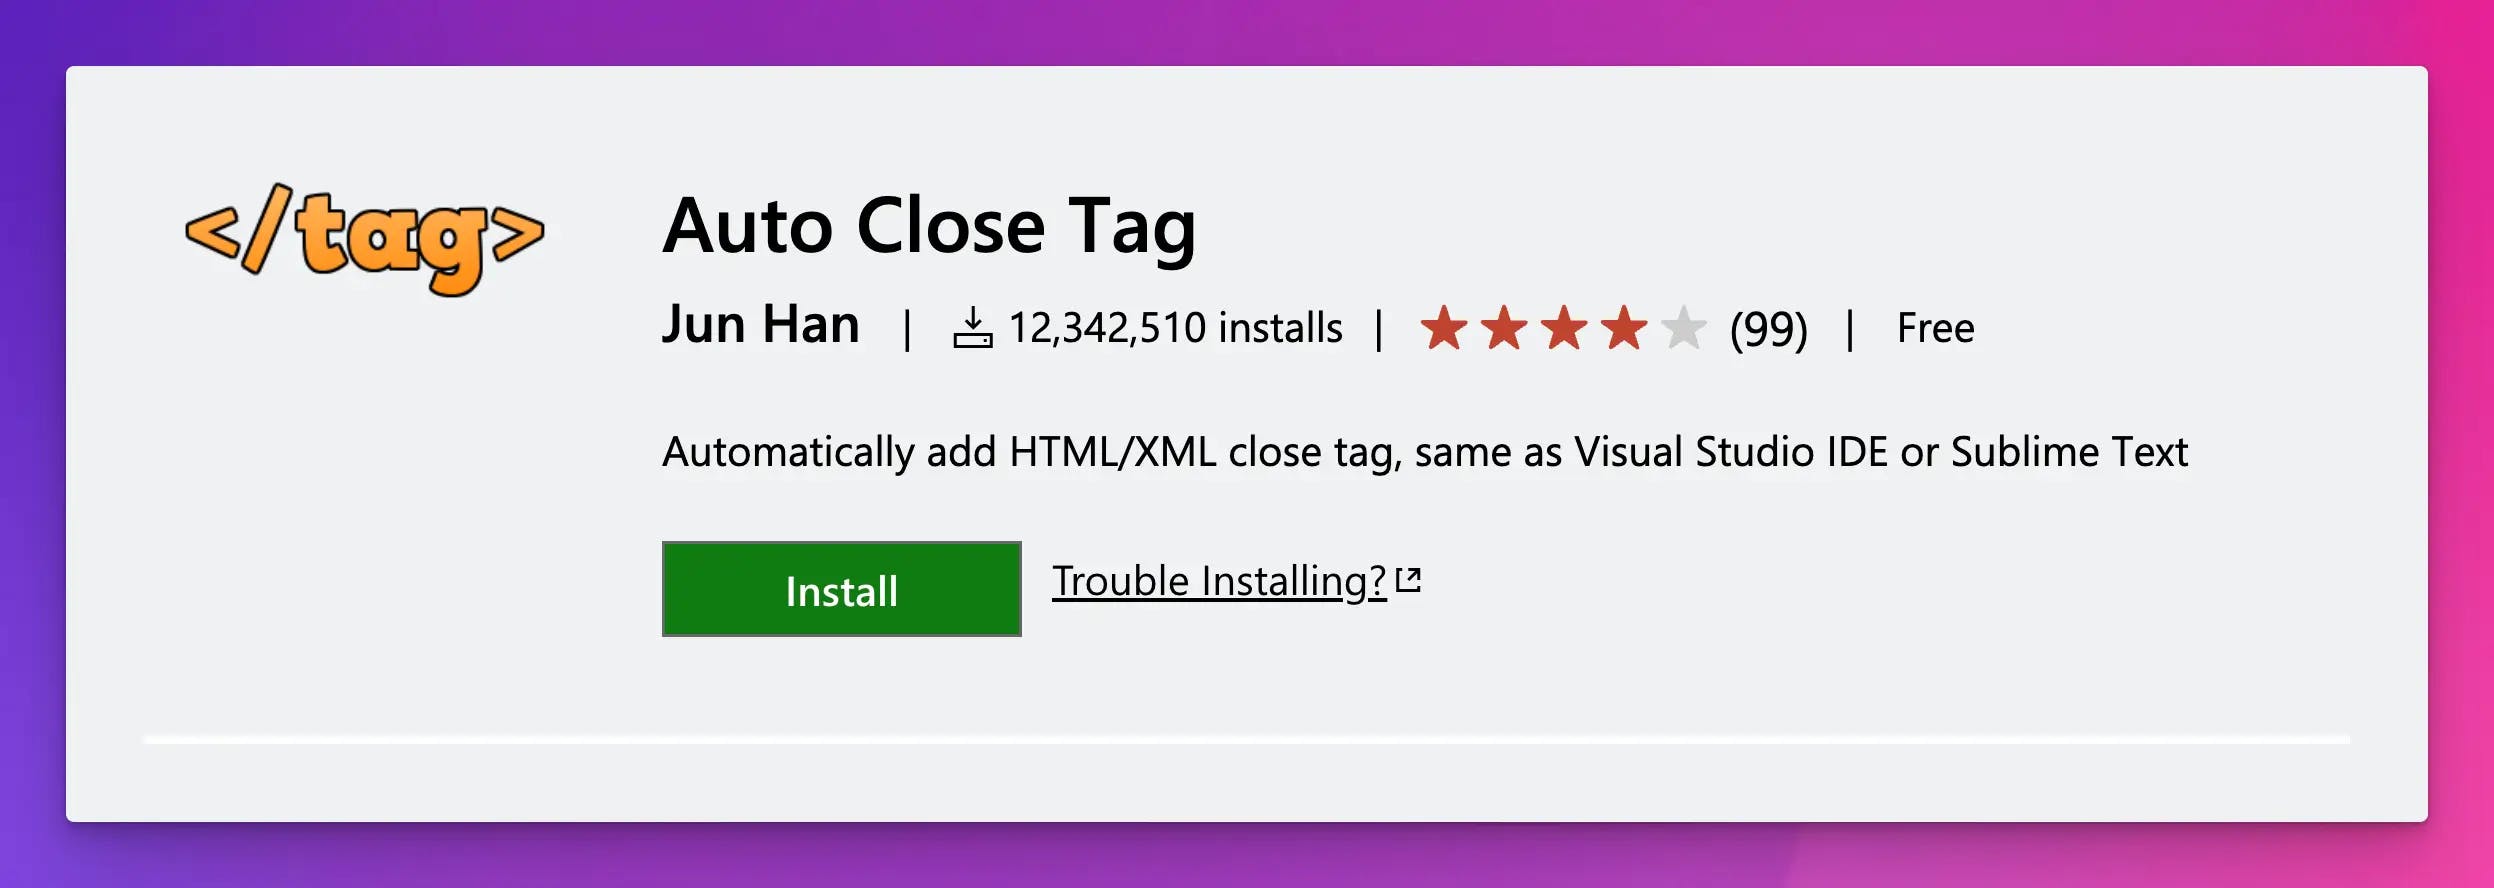 Auto Close Tag VSCode Extension